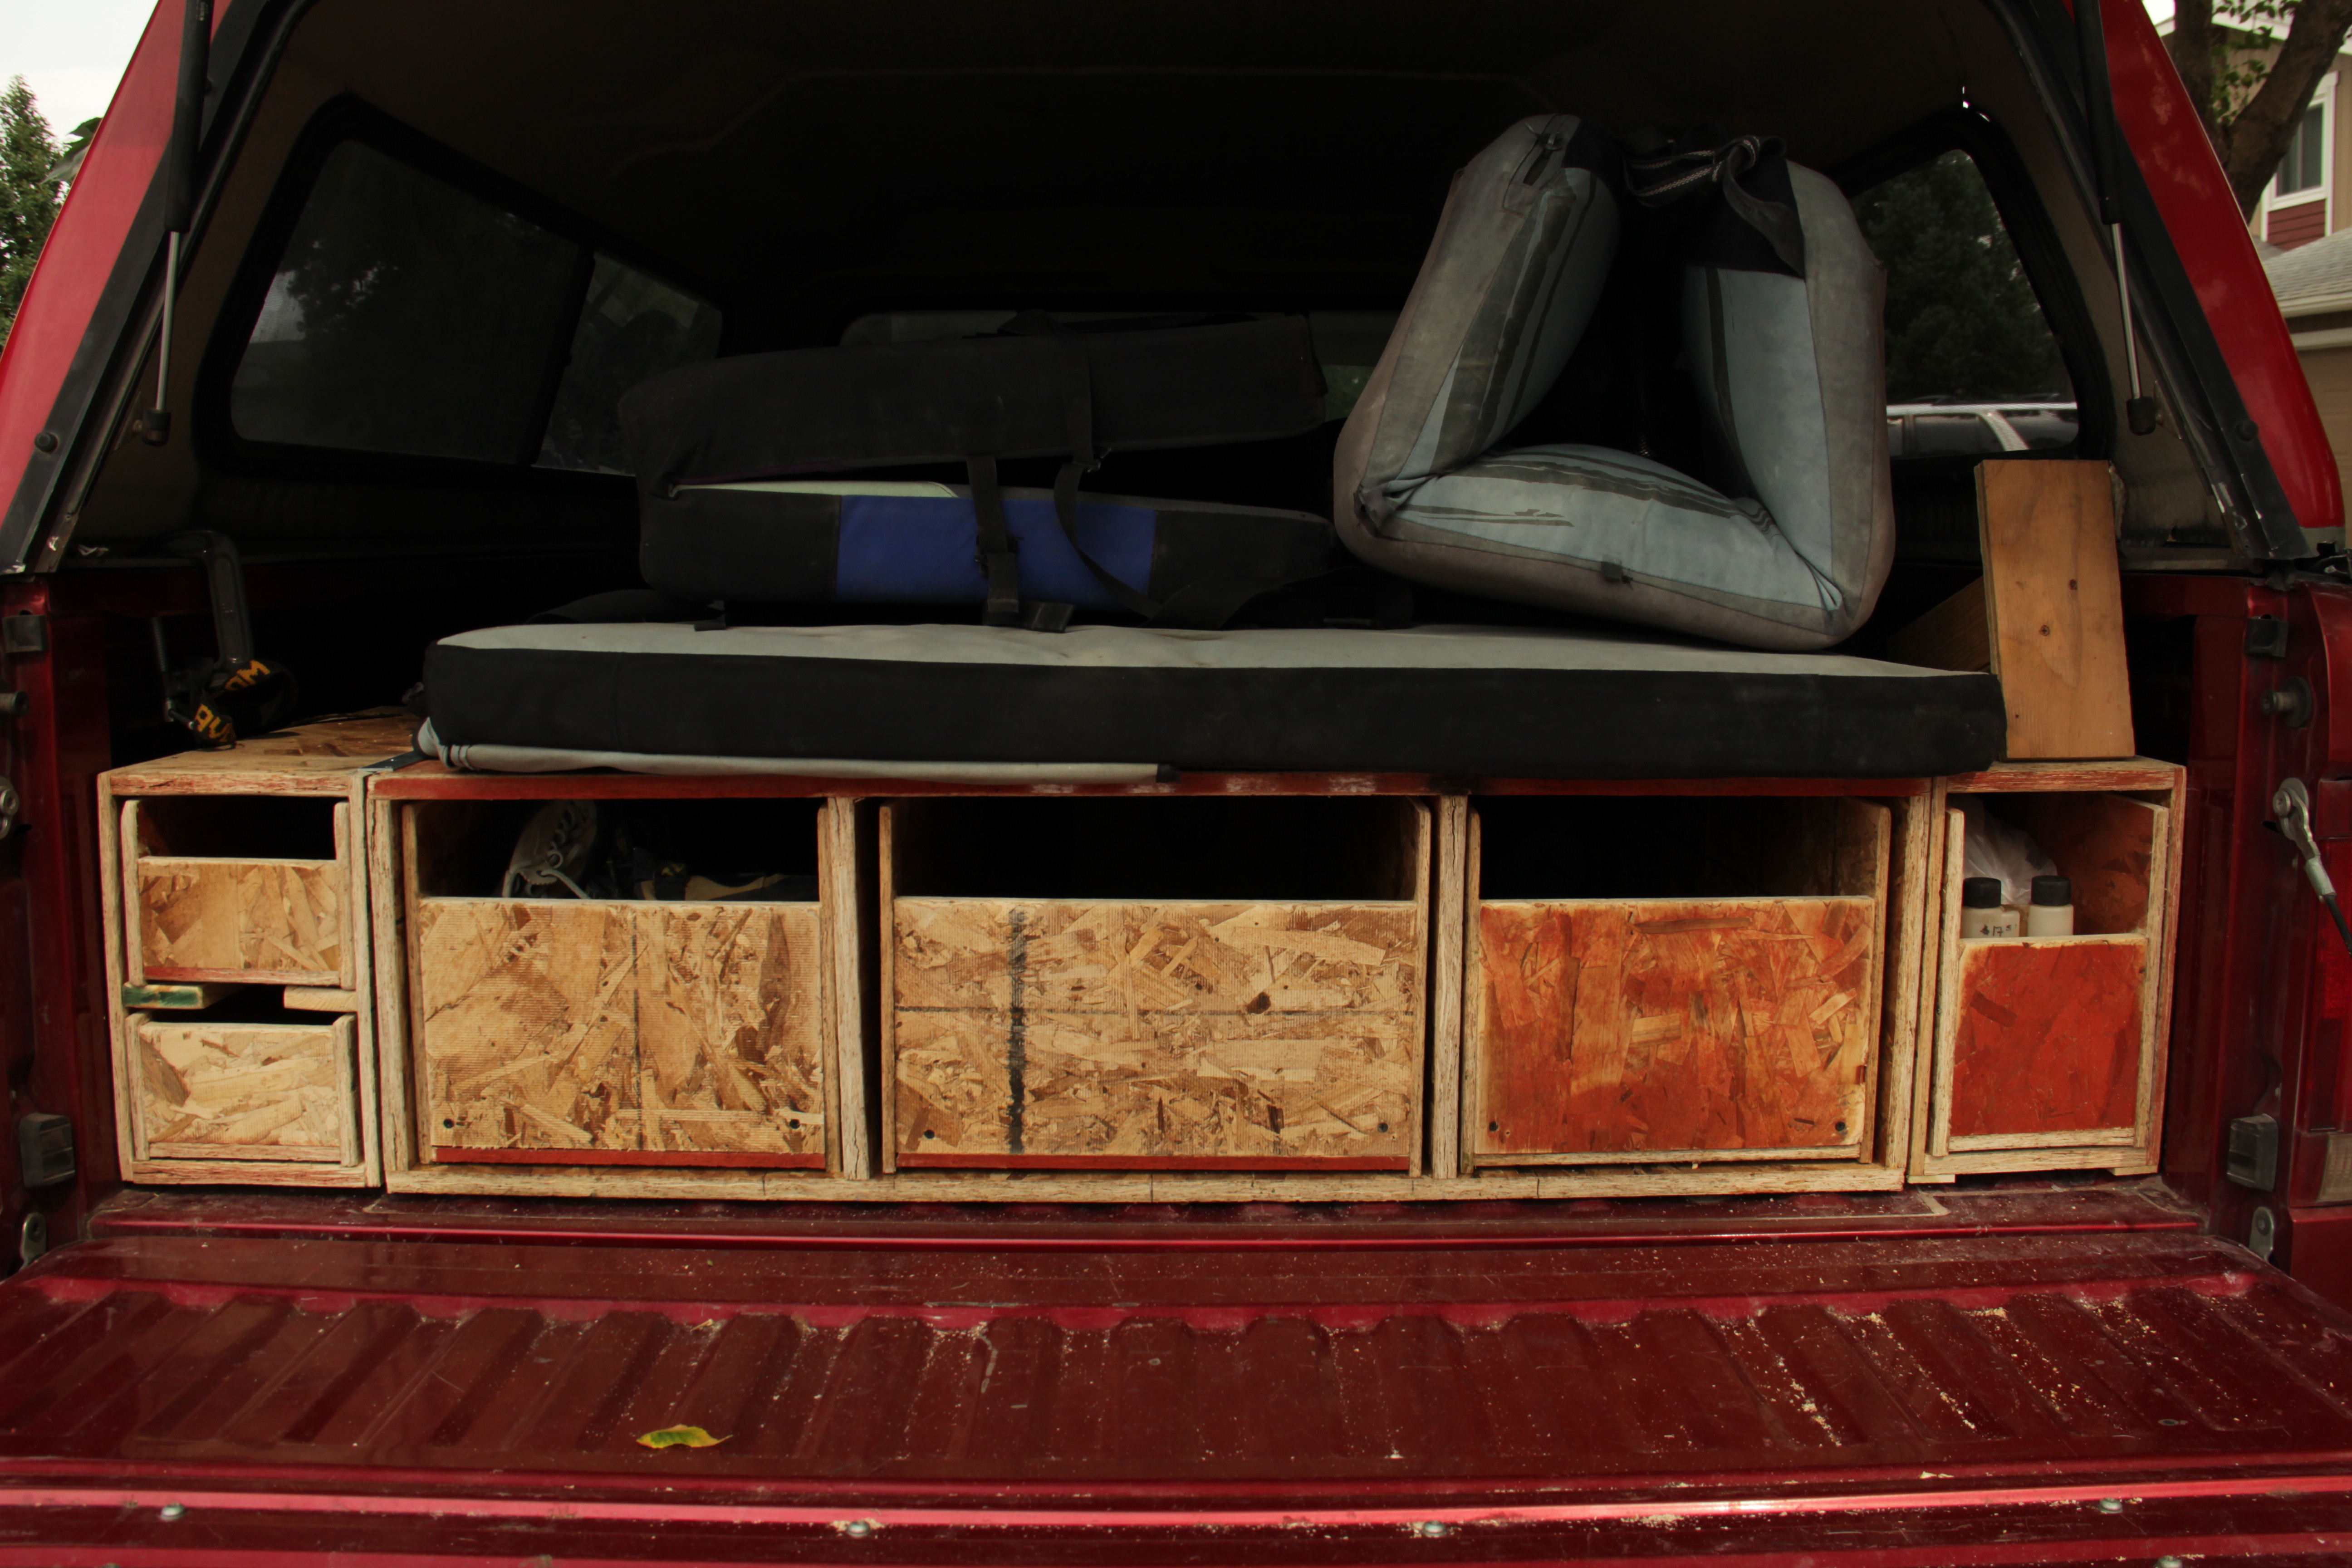 Homemade Truck Bed Drawers